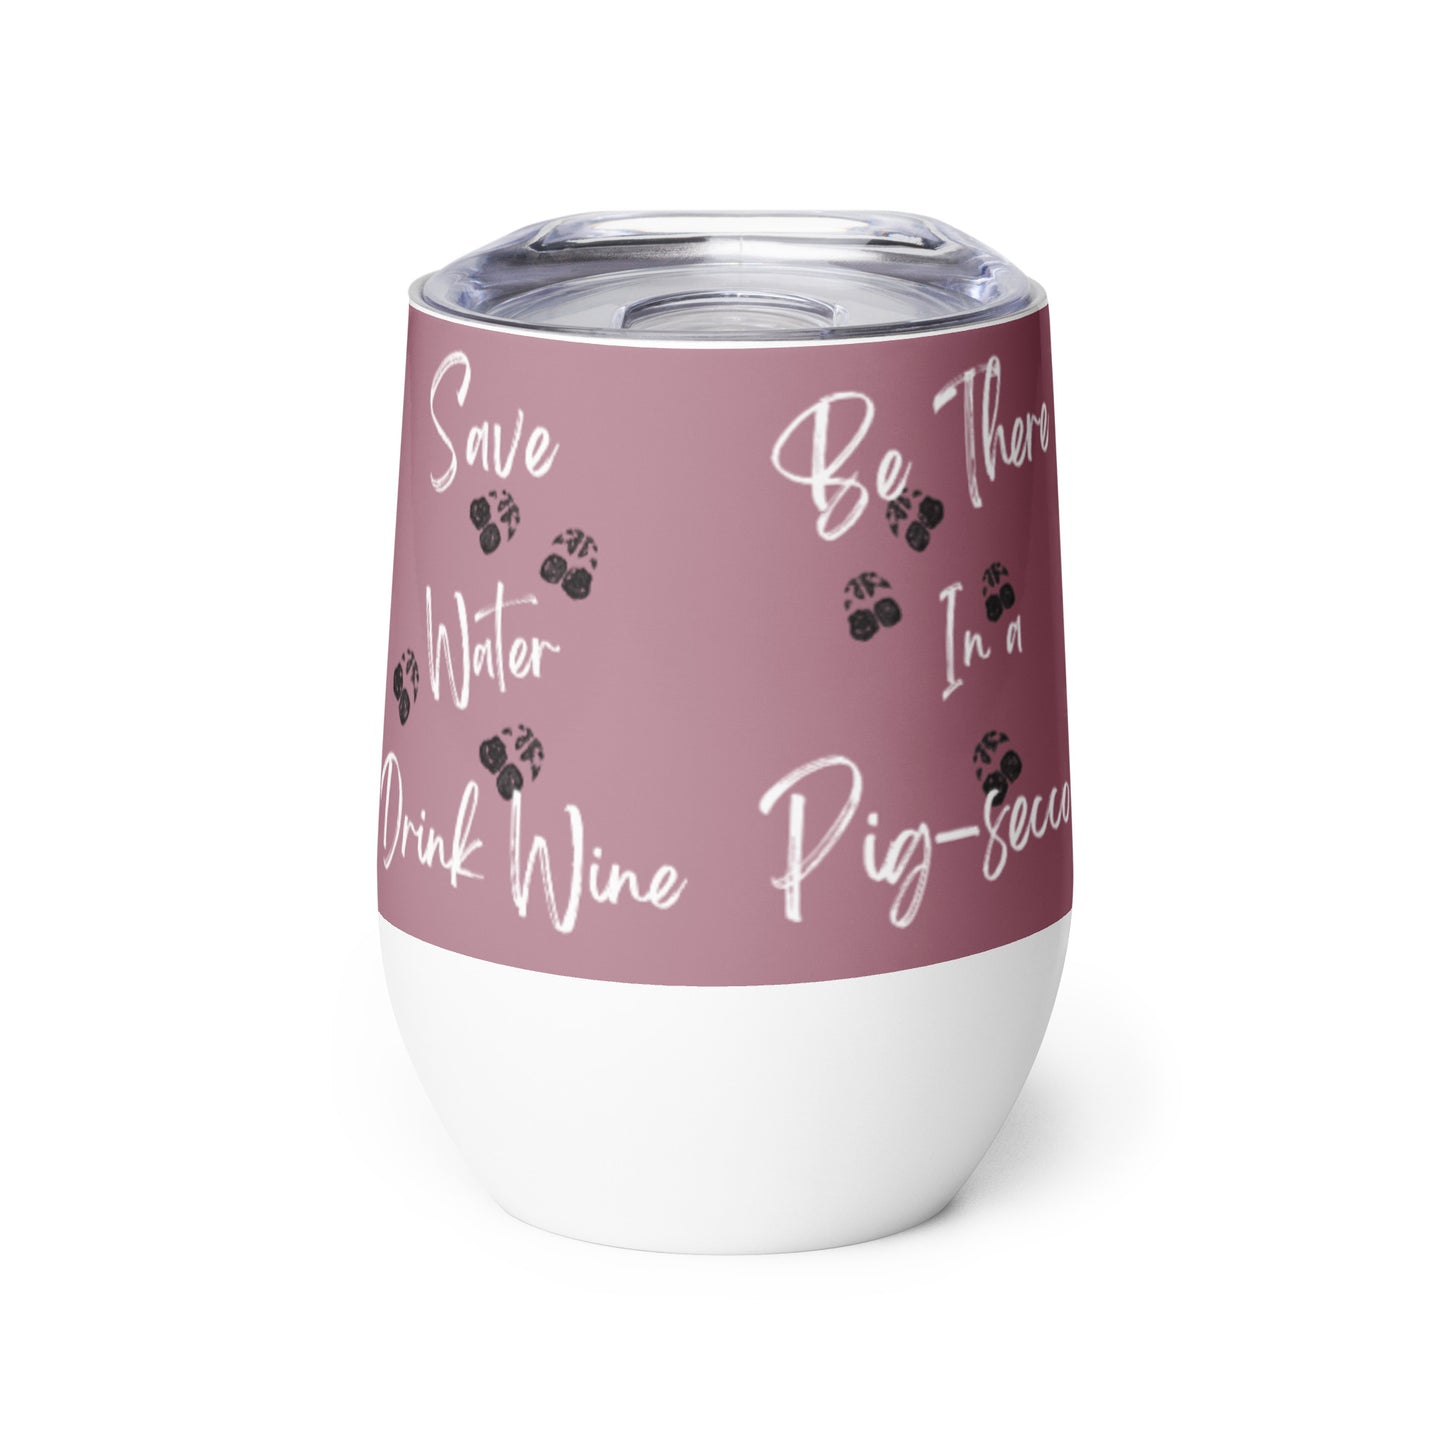 I'll be there in a Pig-secco! (Prosecco)- Adult Grape Juice Holder - Tumbler- Mug- Rose